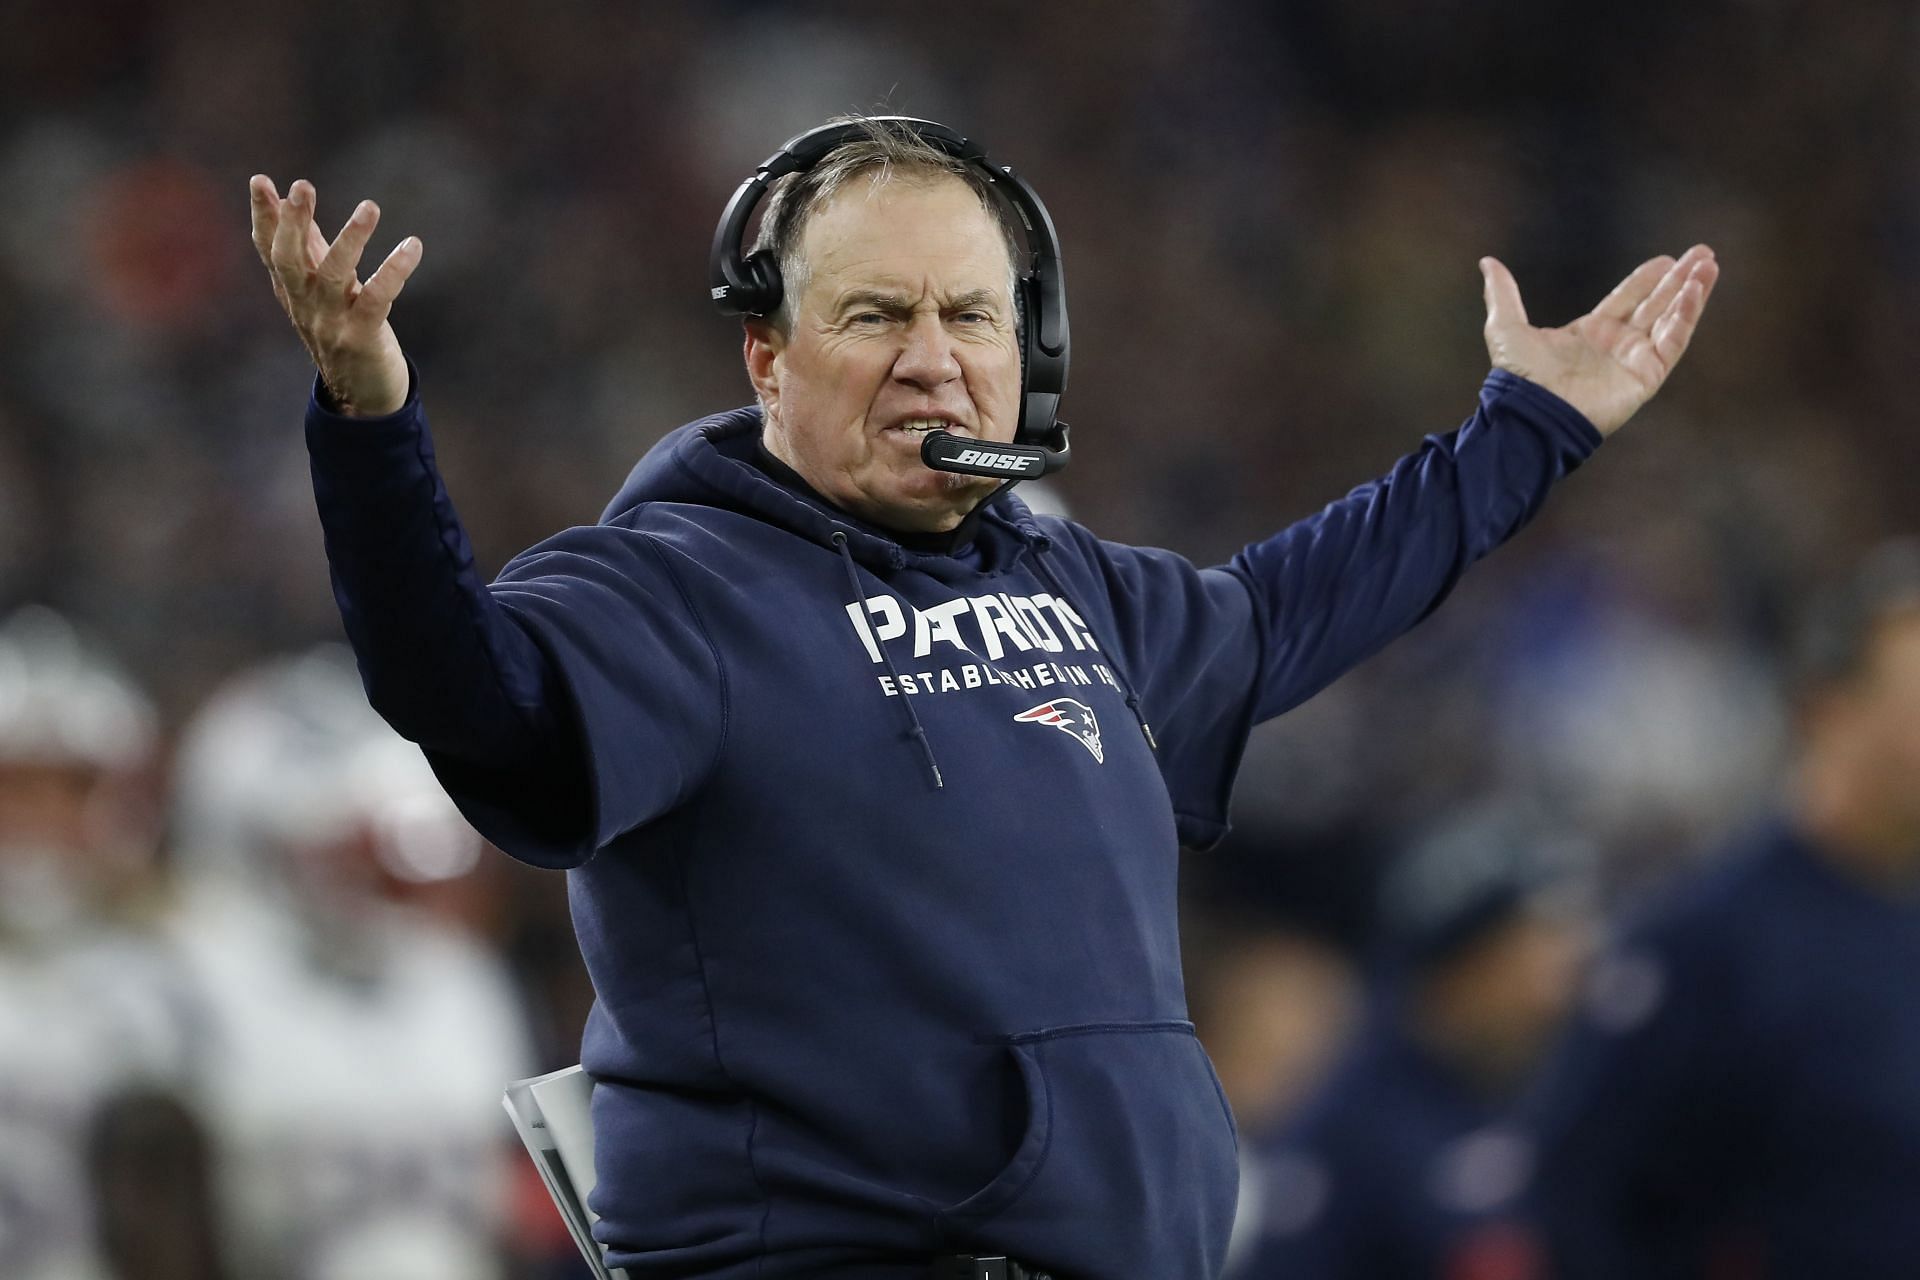 The New England Patriots face difficulties in camp